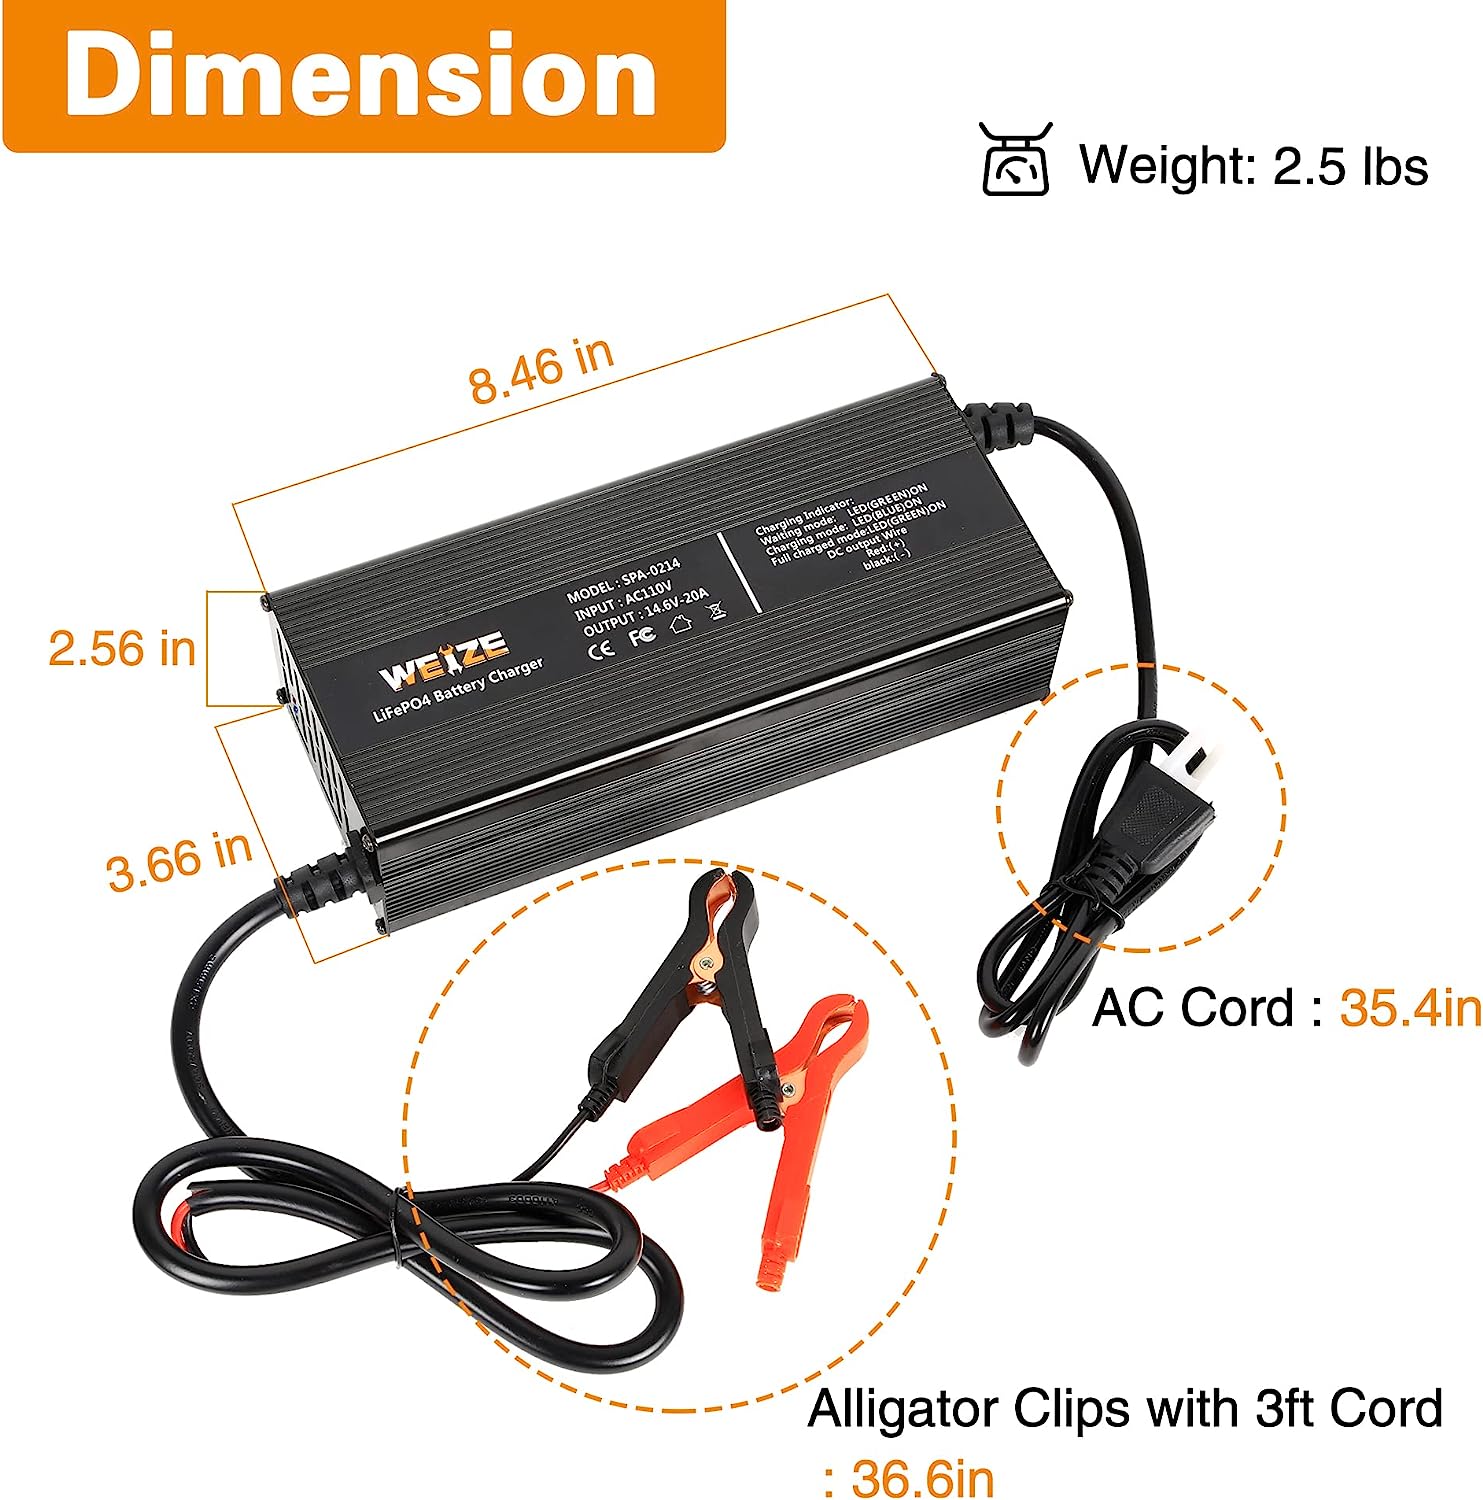 14.6V 20A LiFePO4 Battery Charger